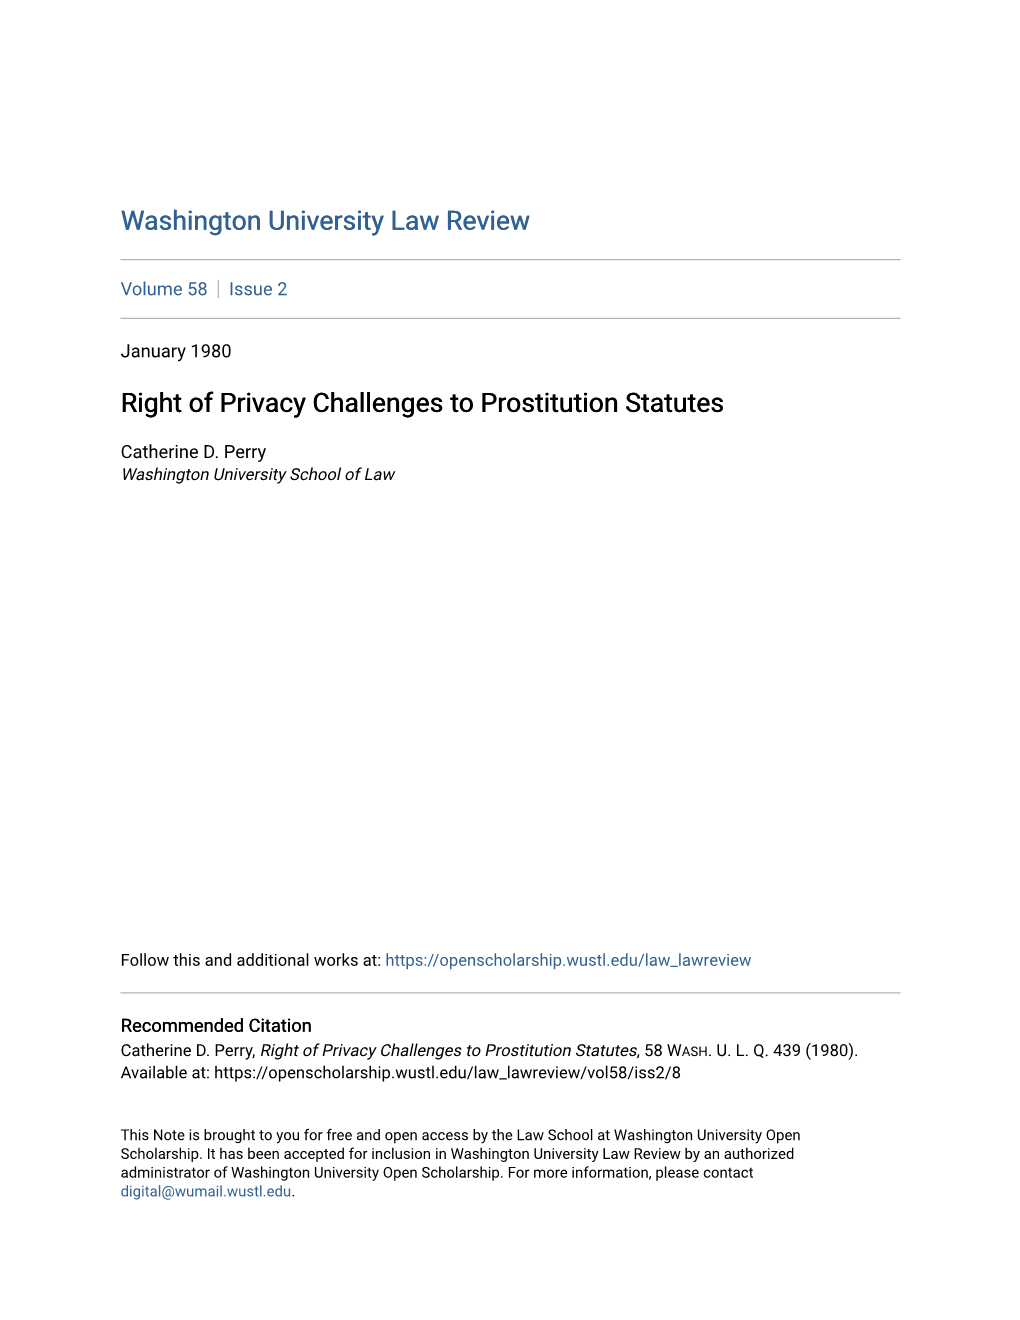 Right of Privacy Challenges to Prostitution Statutes